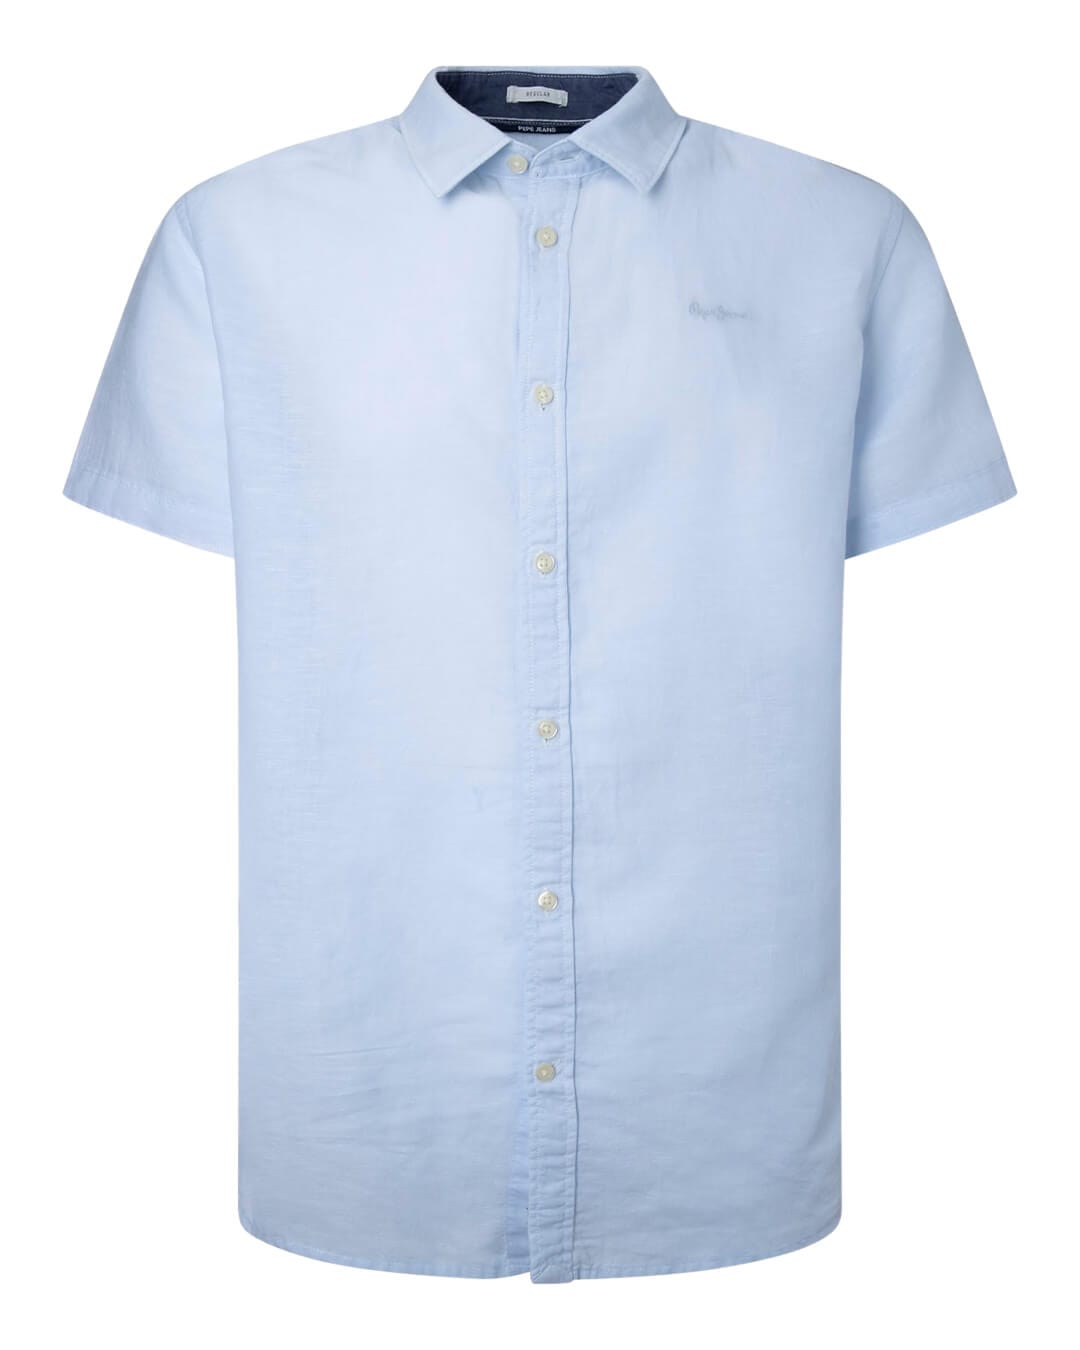 Pepe Jeans Shirts Pepe Jeans Luther Slim Fit Blue Plain Shirt